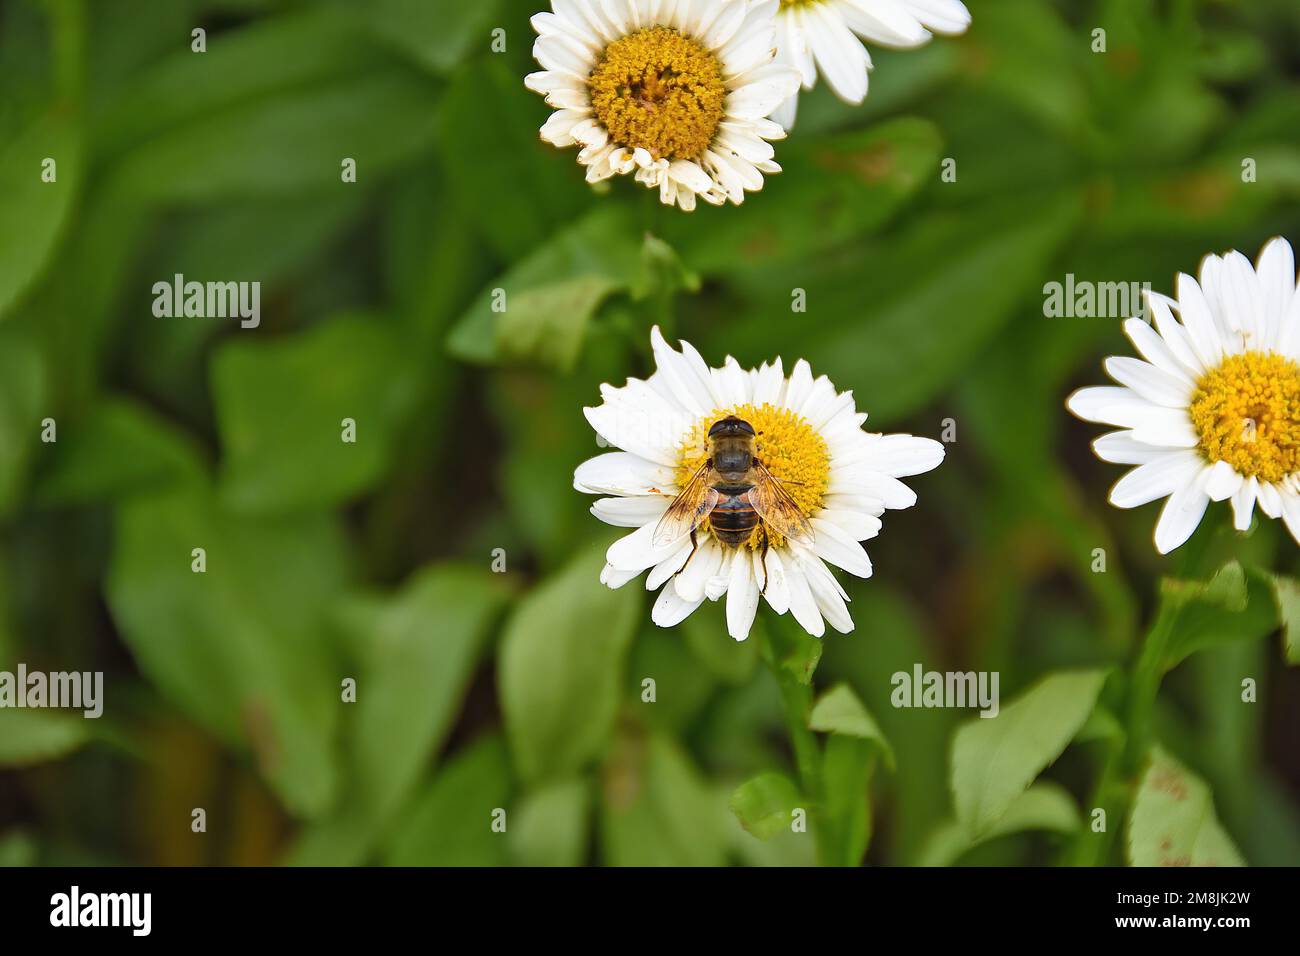 Close-up of a honey bee on a white daisy in a summer garden Stock Photo